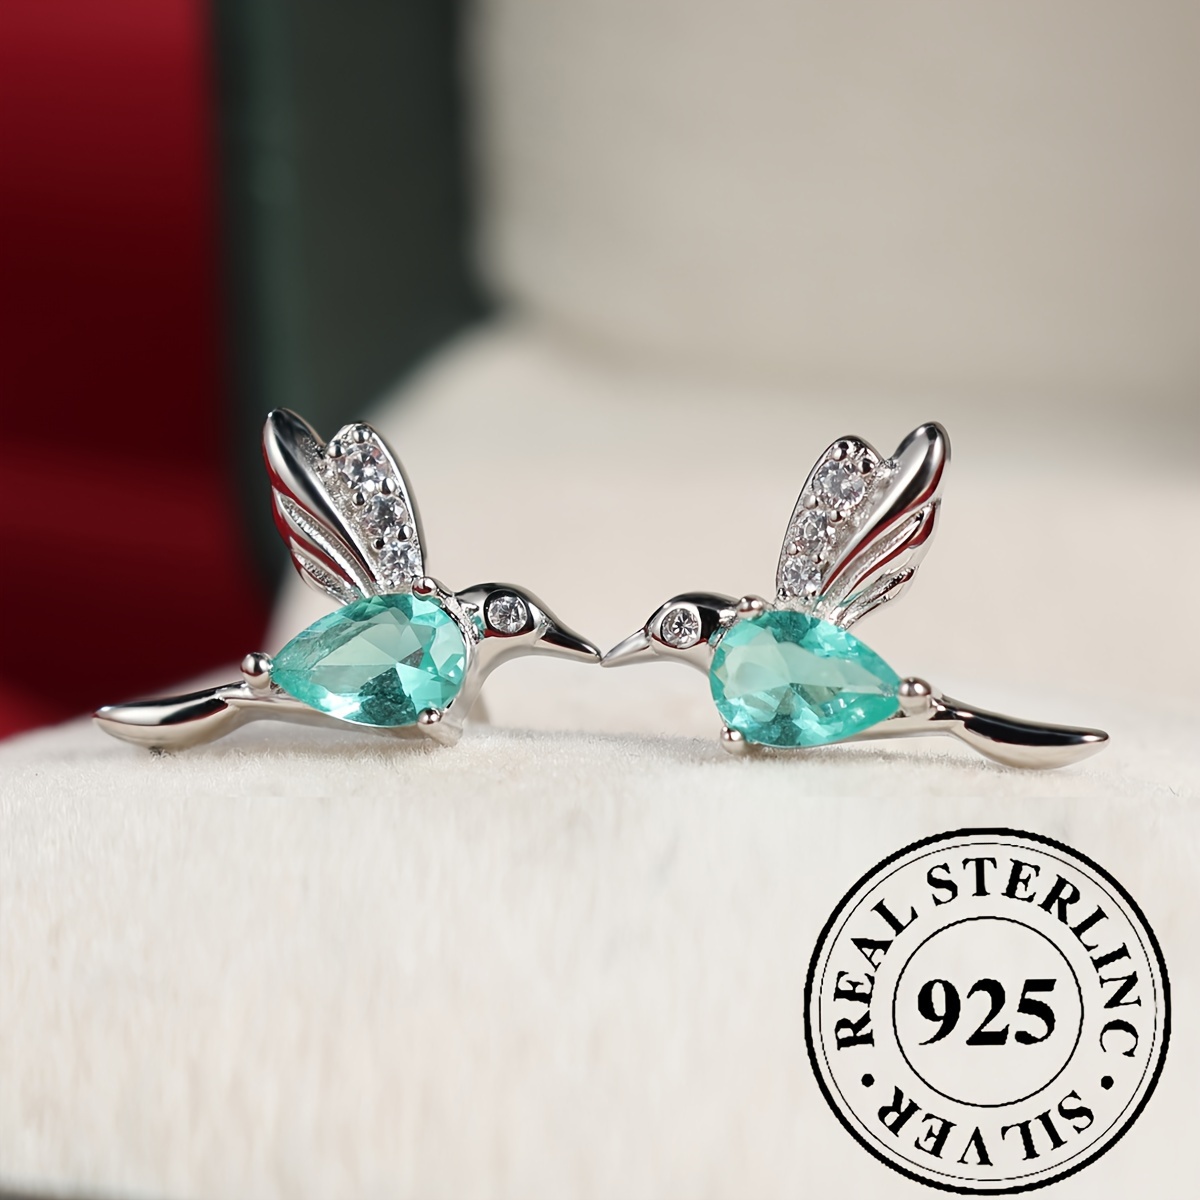 

Exquisite Hummingbird Shaped Stud Earrings 925 Sterling Silver Hypoallergenic Jewelry Zircon Inlaid Elegant Bohemian Style Pretty Female Gift